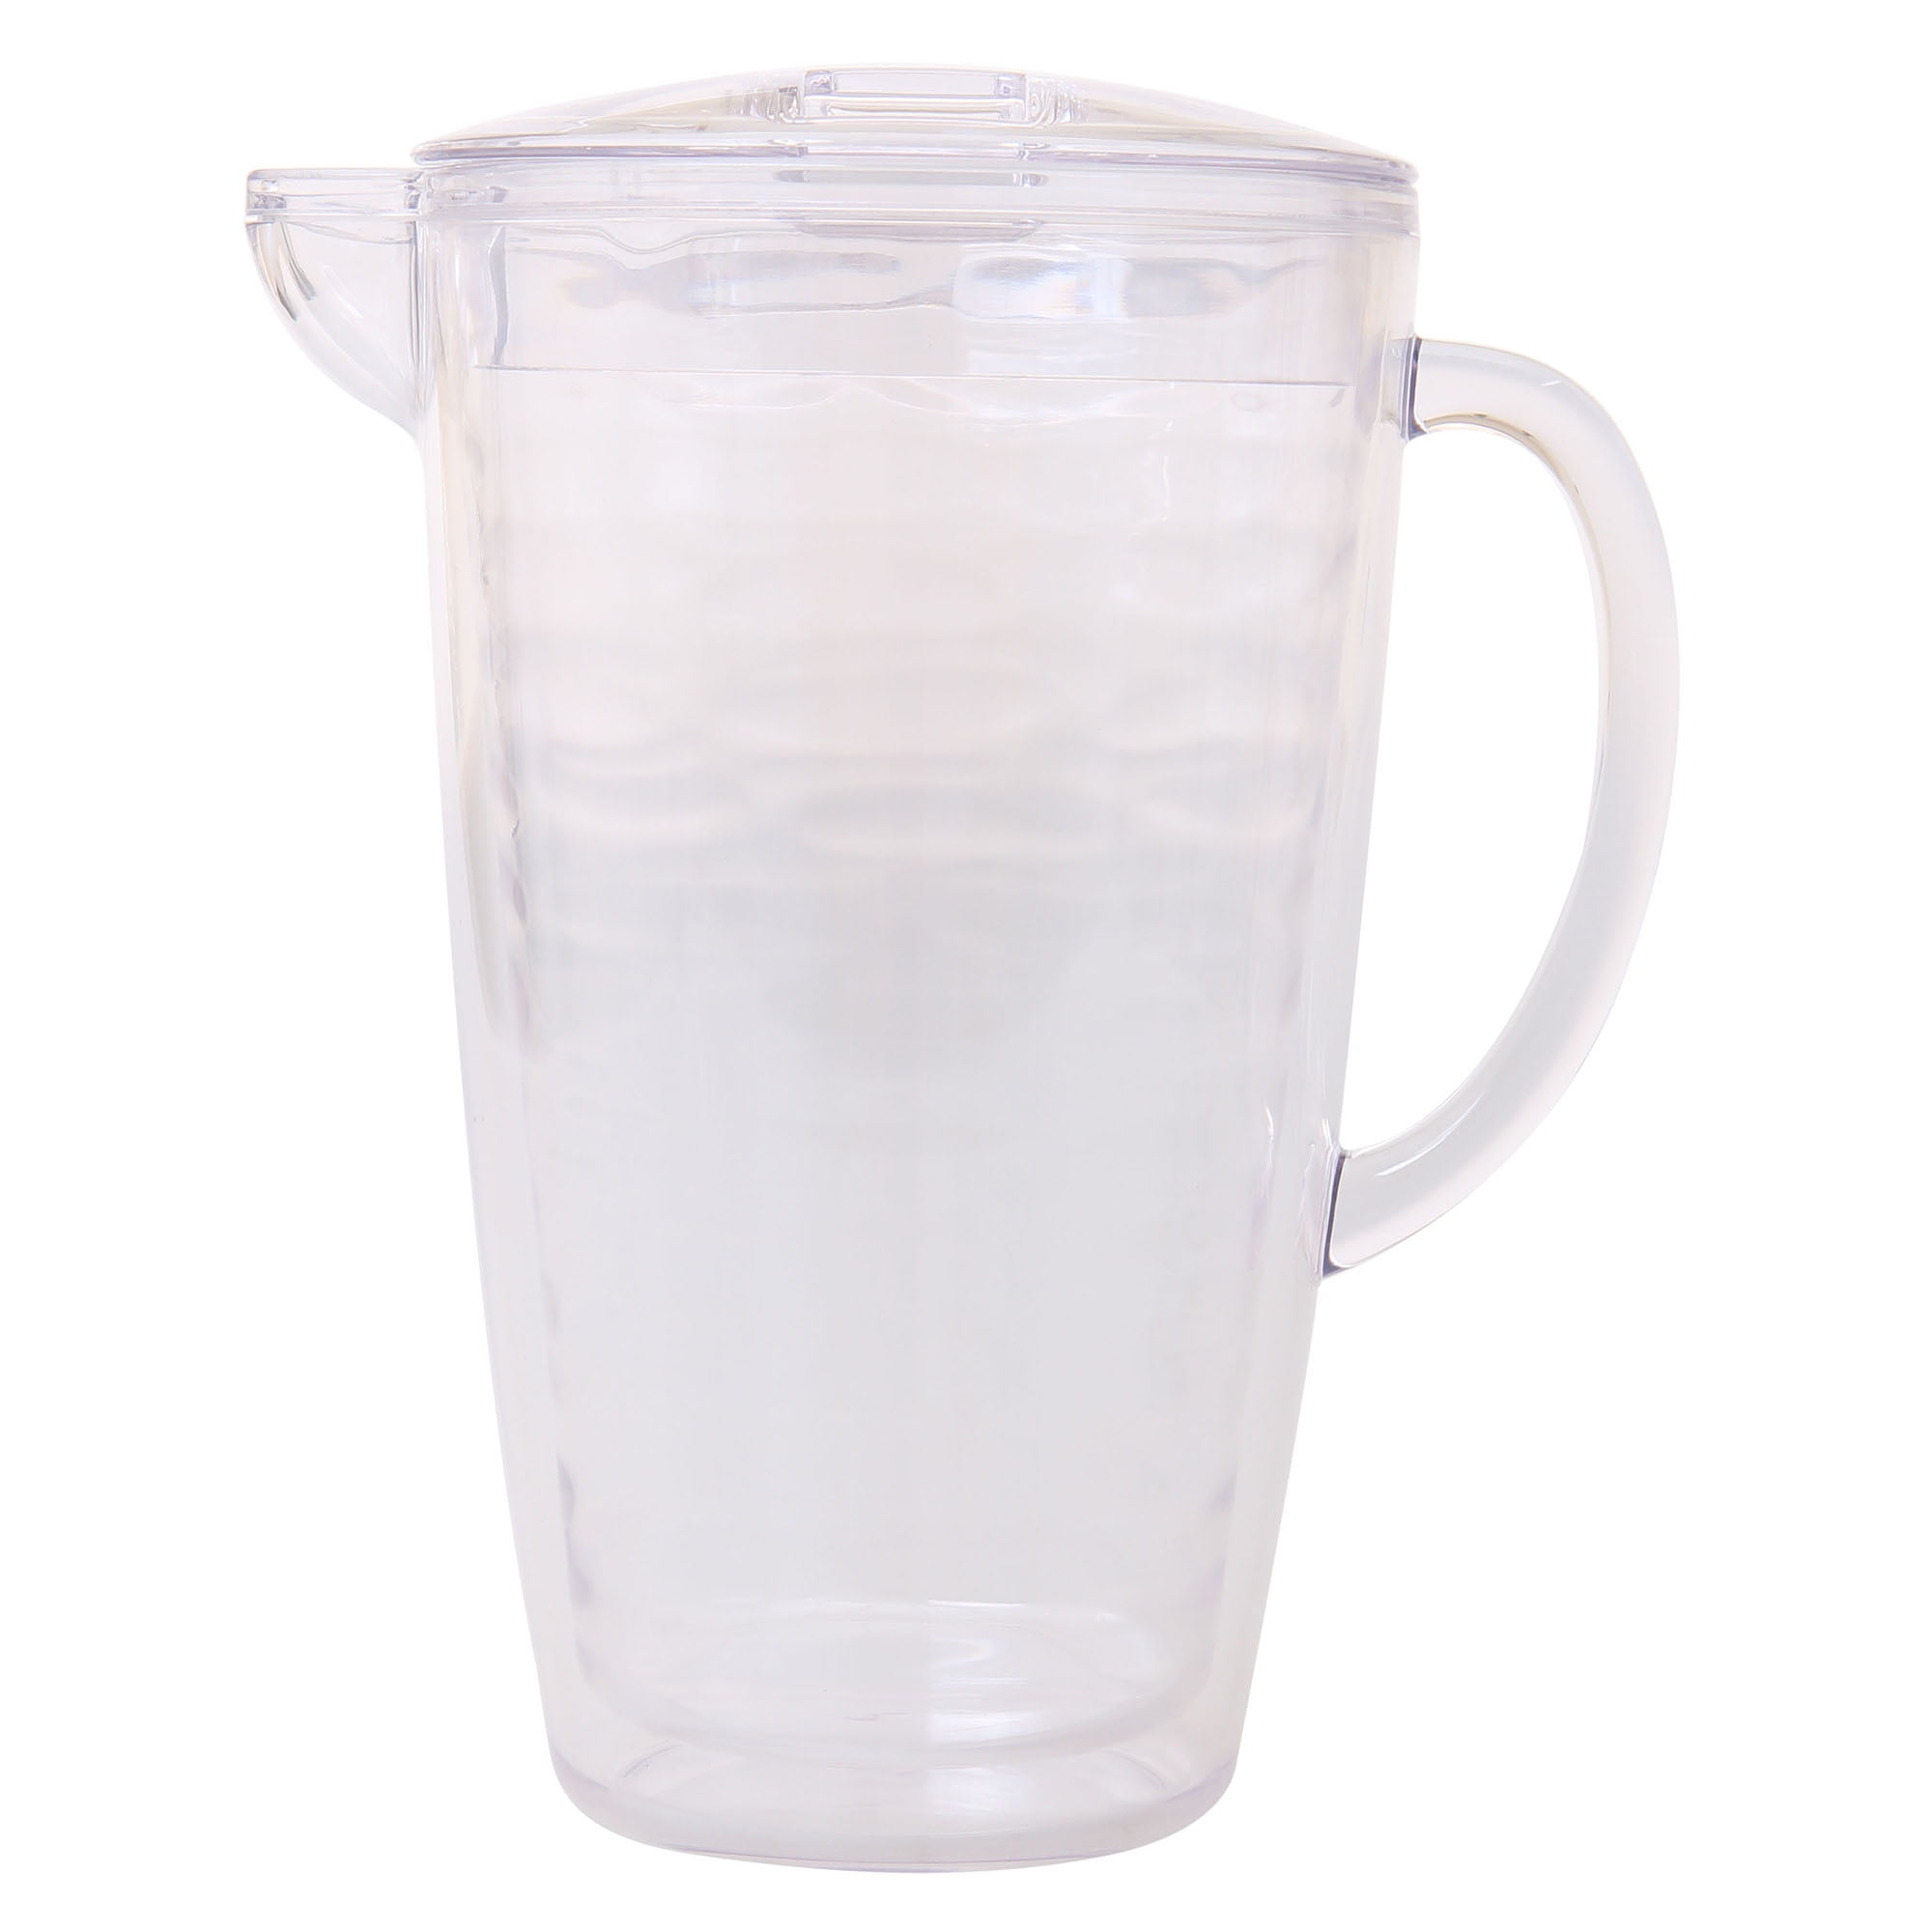 Mainstays Insulated Clear Plastic Pitcher 2 1/2 Quart